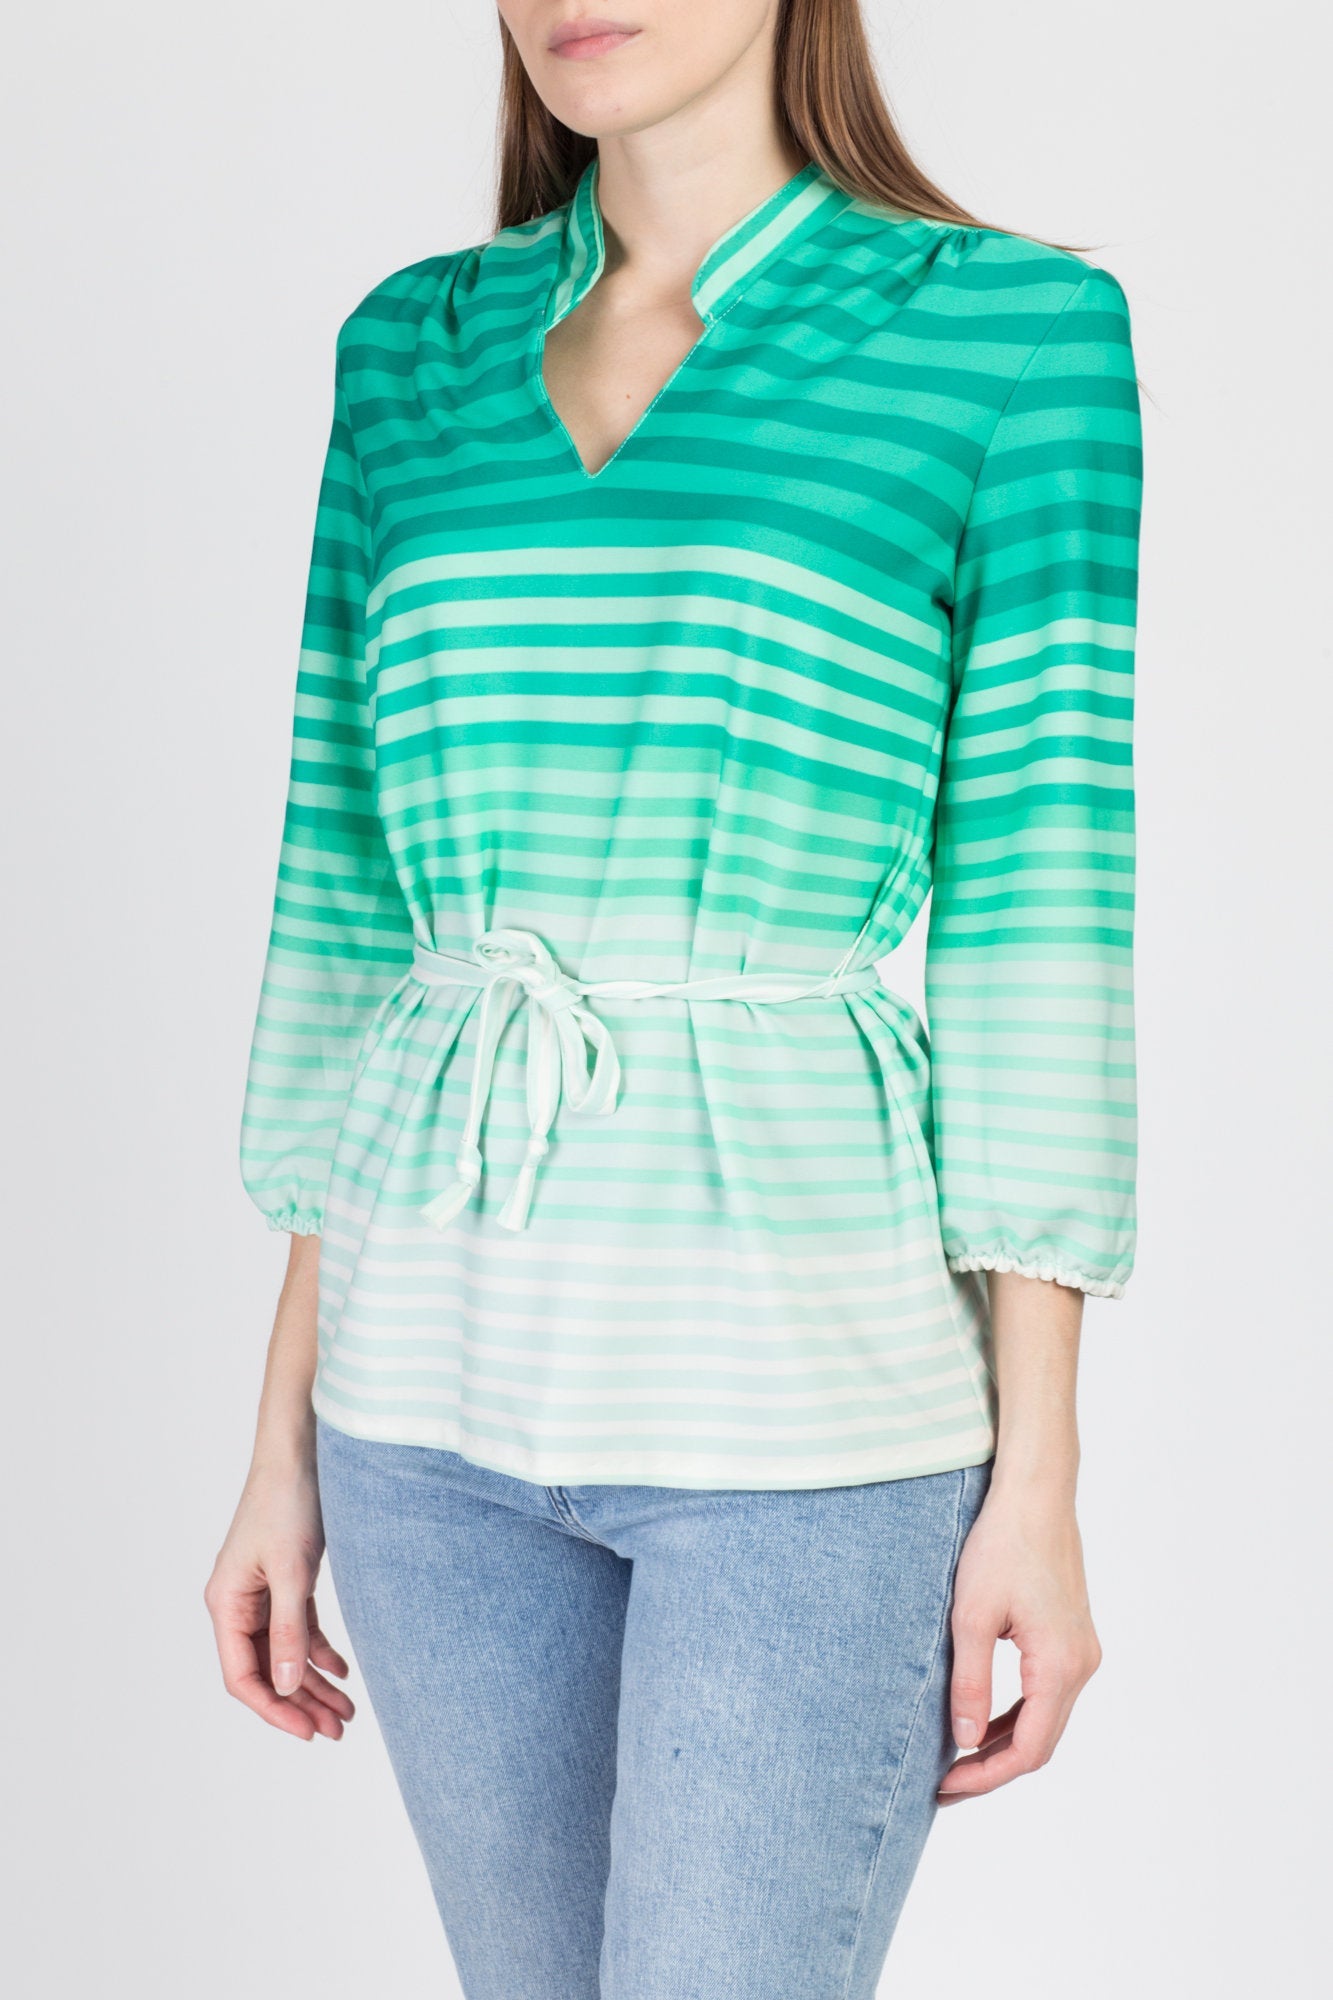 70s Mod Green Ombre Striped Top - Large